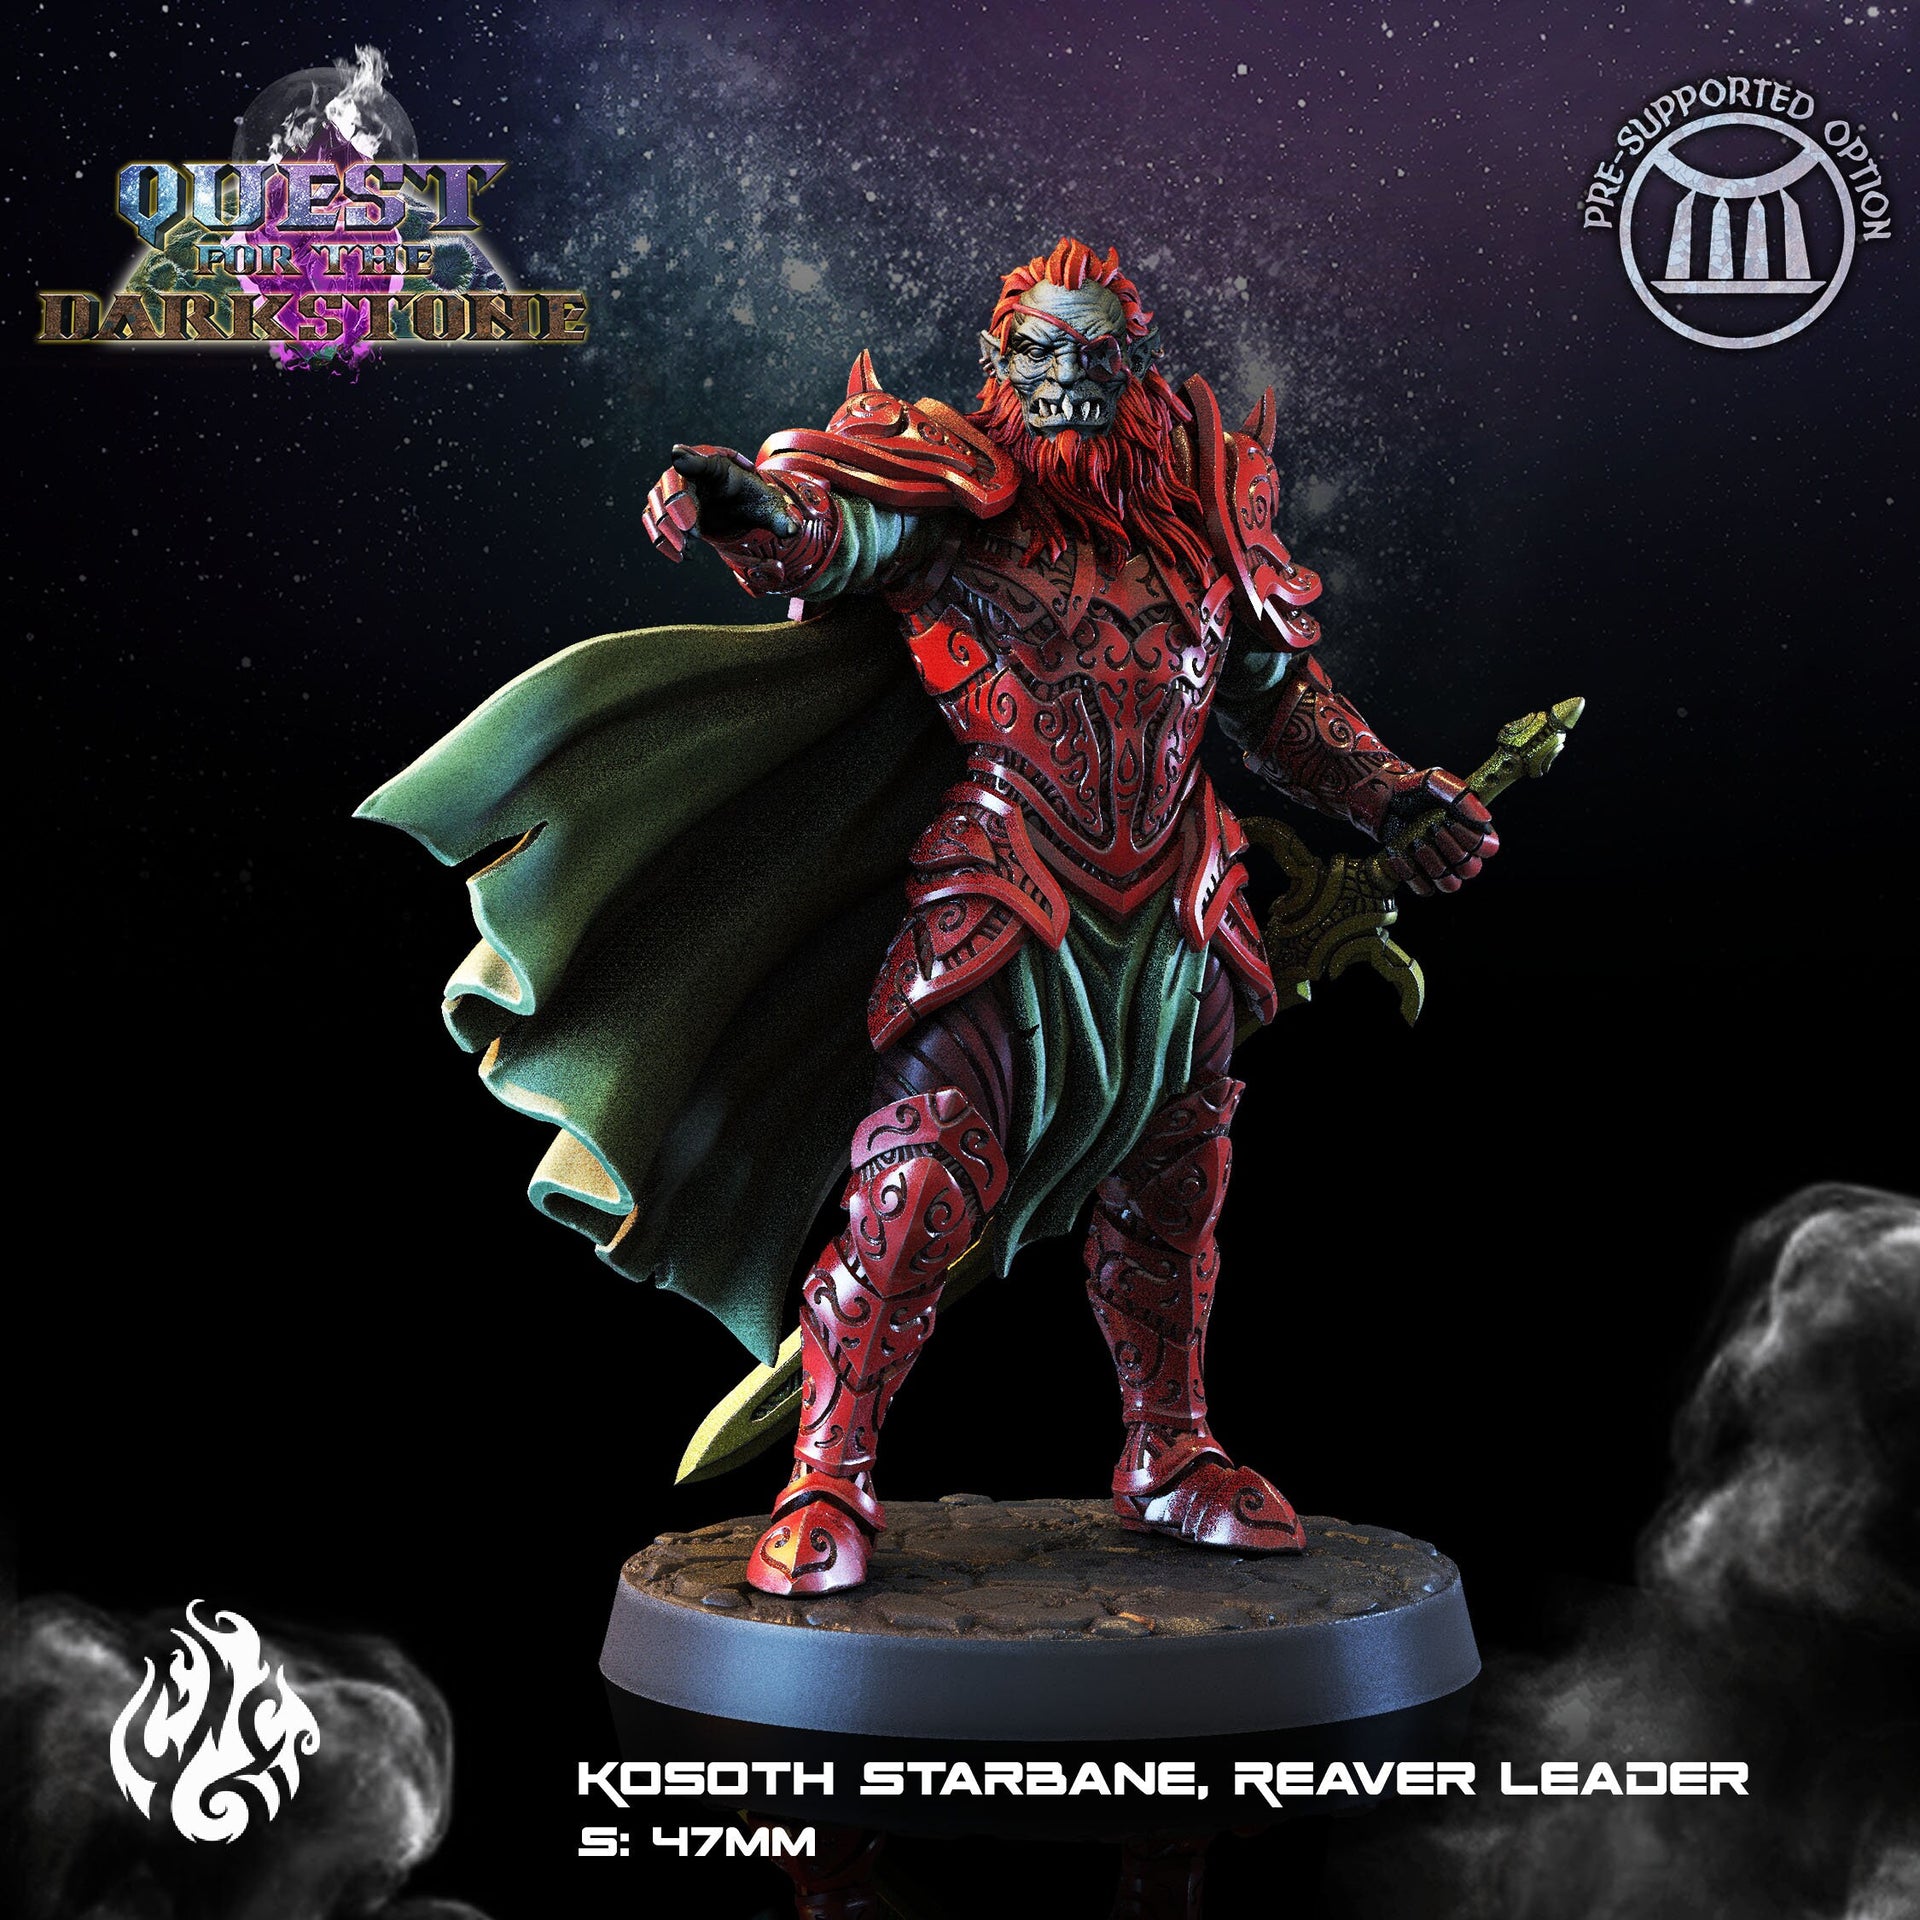 Kosoth Starbane, Reaver Leader - Crippled God Foundry - Quest for The DarkStone 